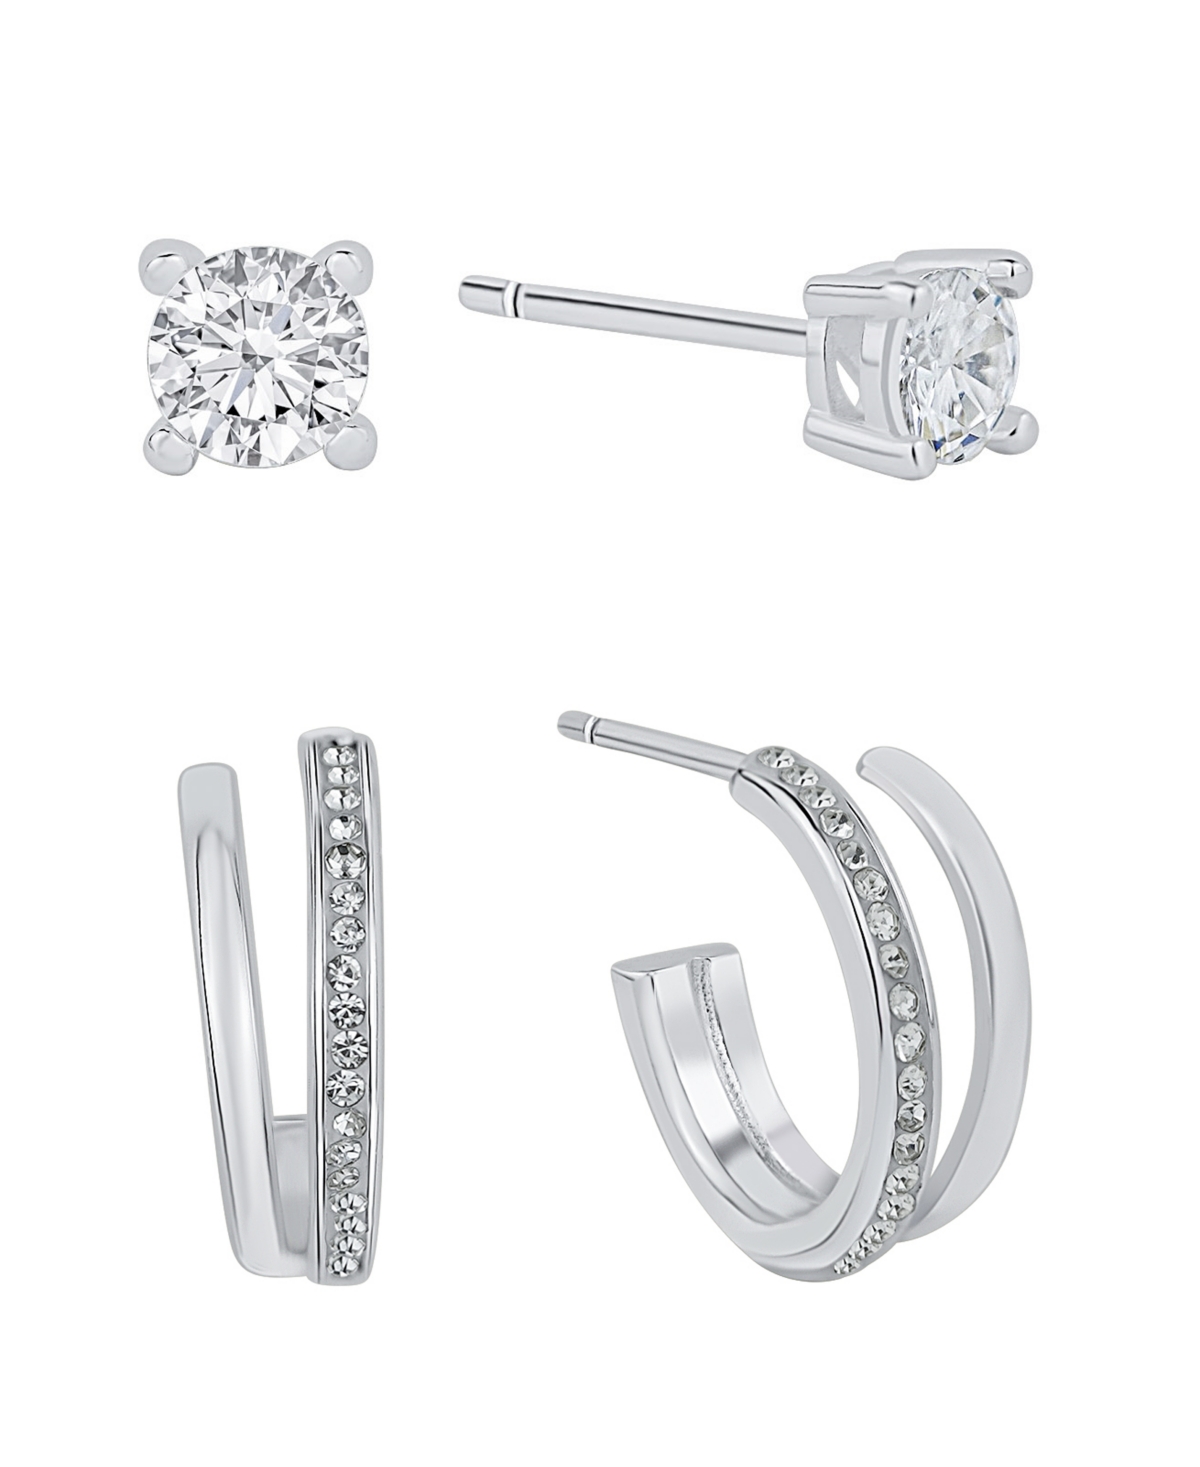 Crystal Hoop and Cubic Zirconia Stud Earring Set - Silver Plated